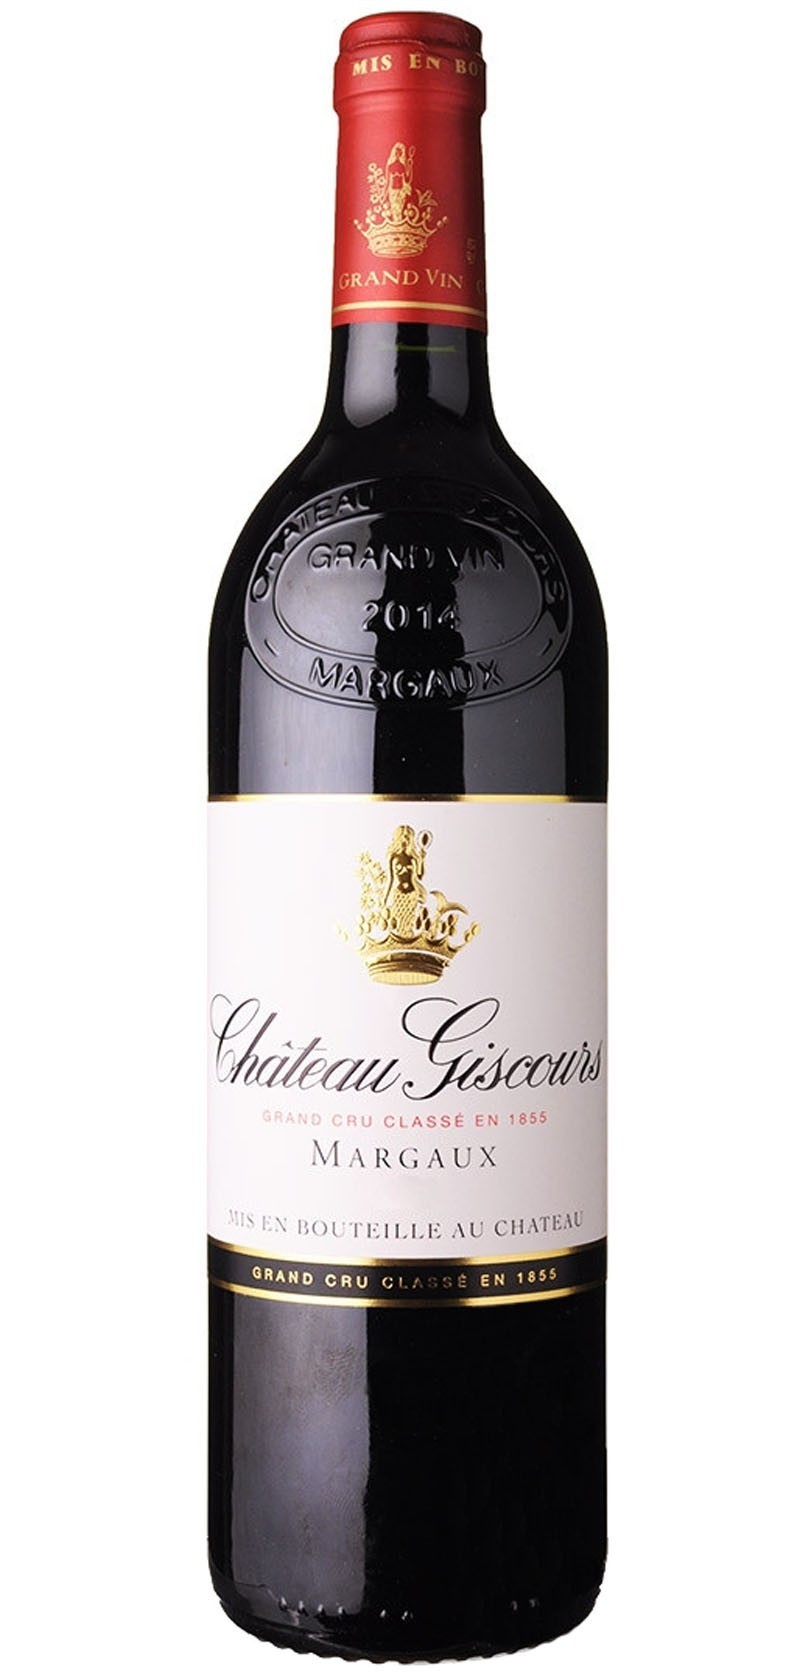 Château Giscours 2017 - Margaux appellation - Red wine